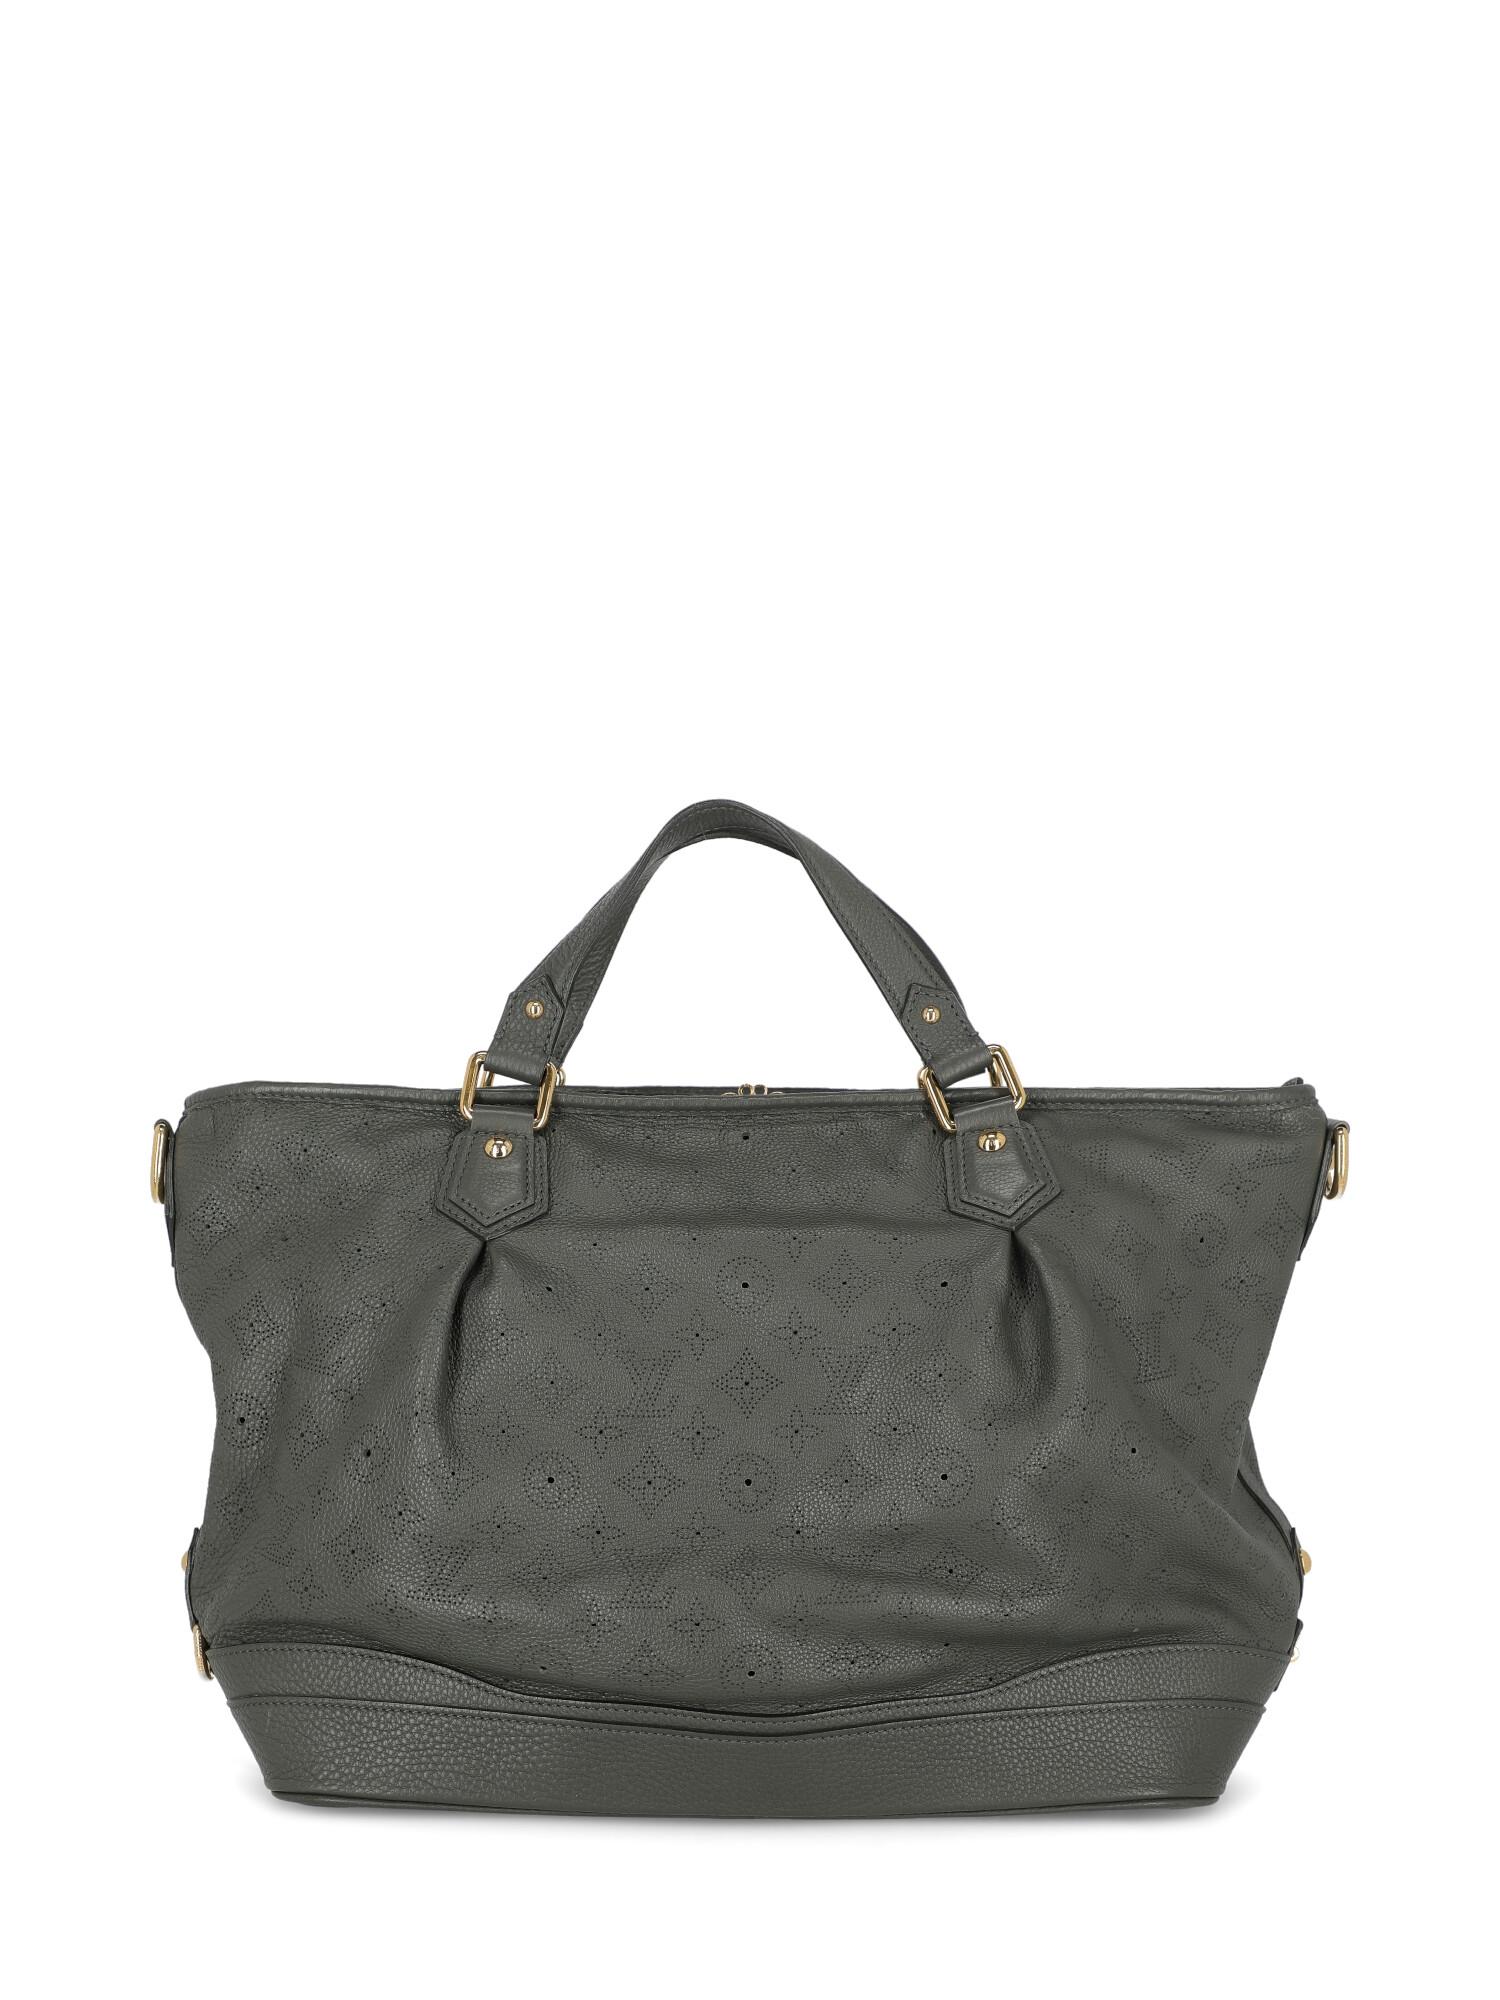 Louis Vuitton Woman Handbag Mahina Grey Leather In Good Condition For Sale In Milan, IT